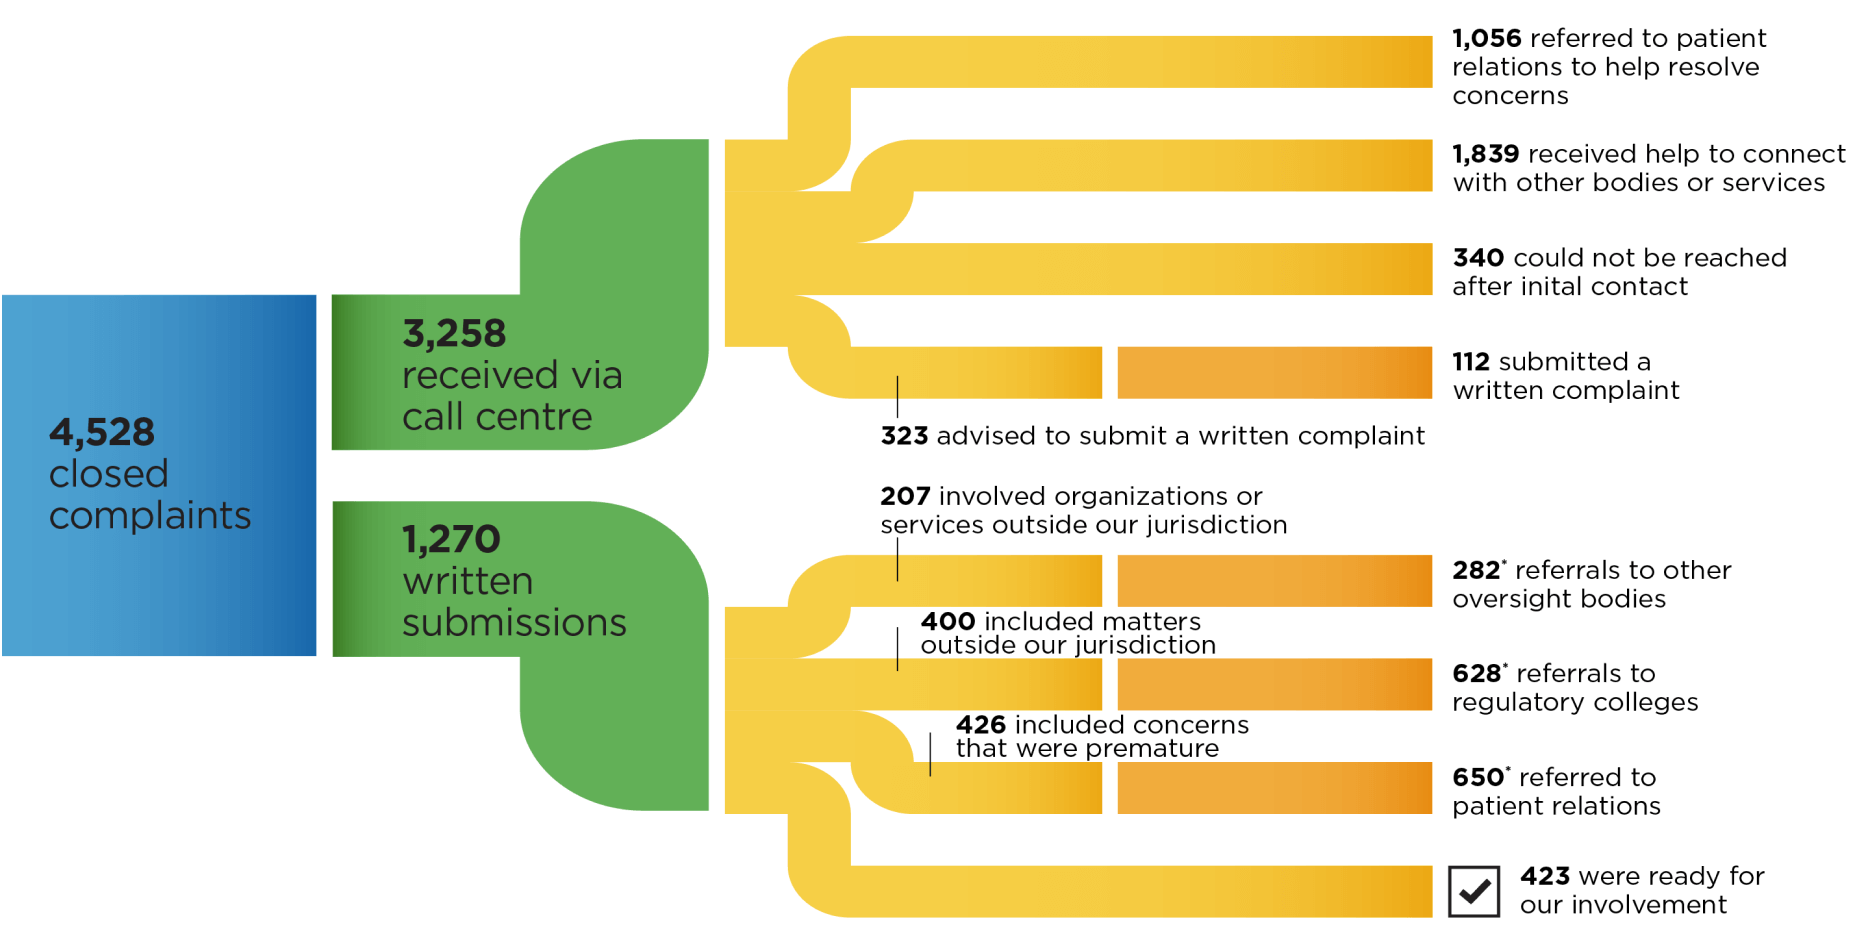 Flow chart summarizes  4,528 complaints that were closed. Of these, 423 of the closed complaints were ready for our involvement. The majority of the other complaints involve files where Patient Ombudsman provided support to direct and refer the issue to other appropriate contacts, including patient relations, other oversight bodies, and regulatory colleges.